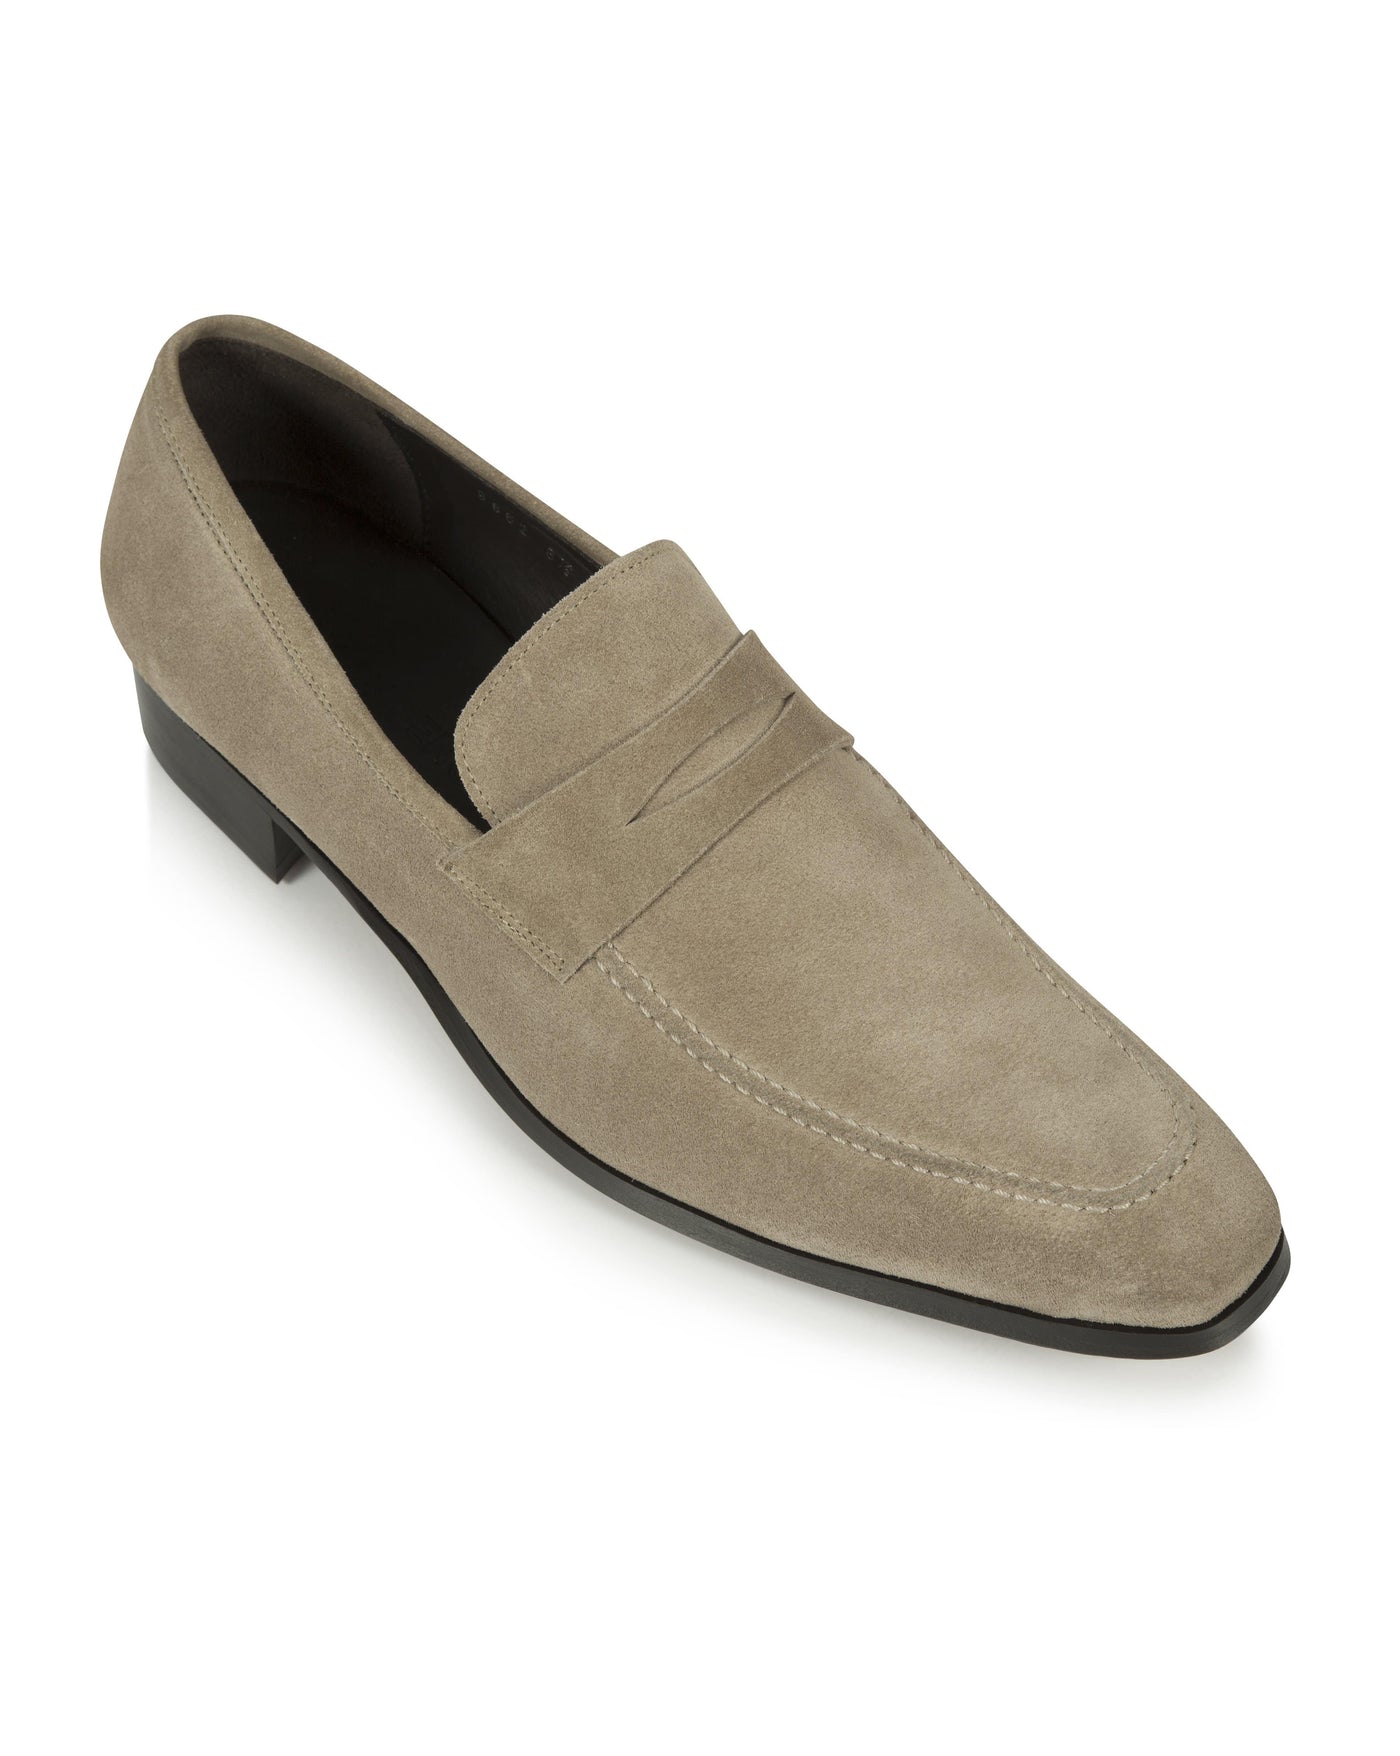 Beige Suede Hand-Stitched Penny Loafer